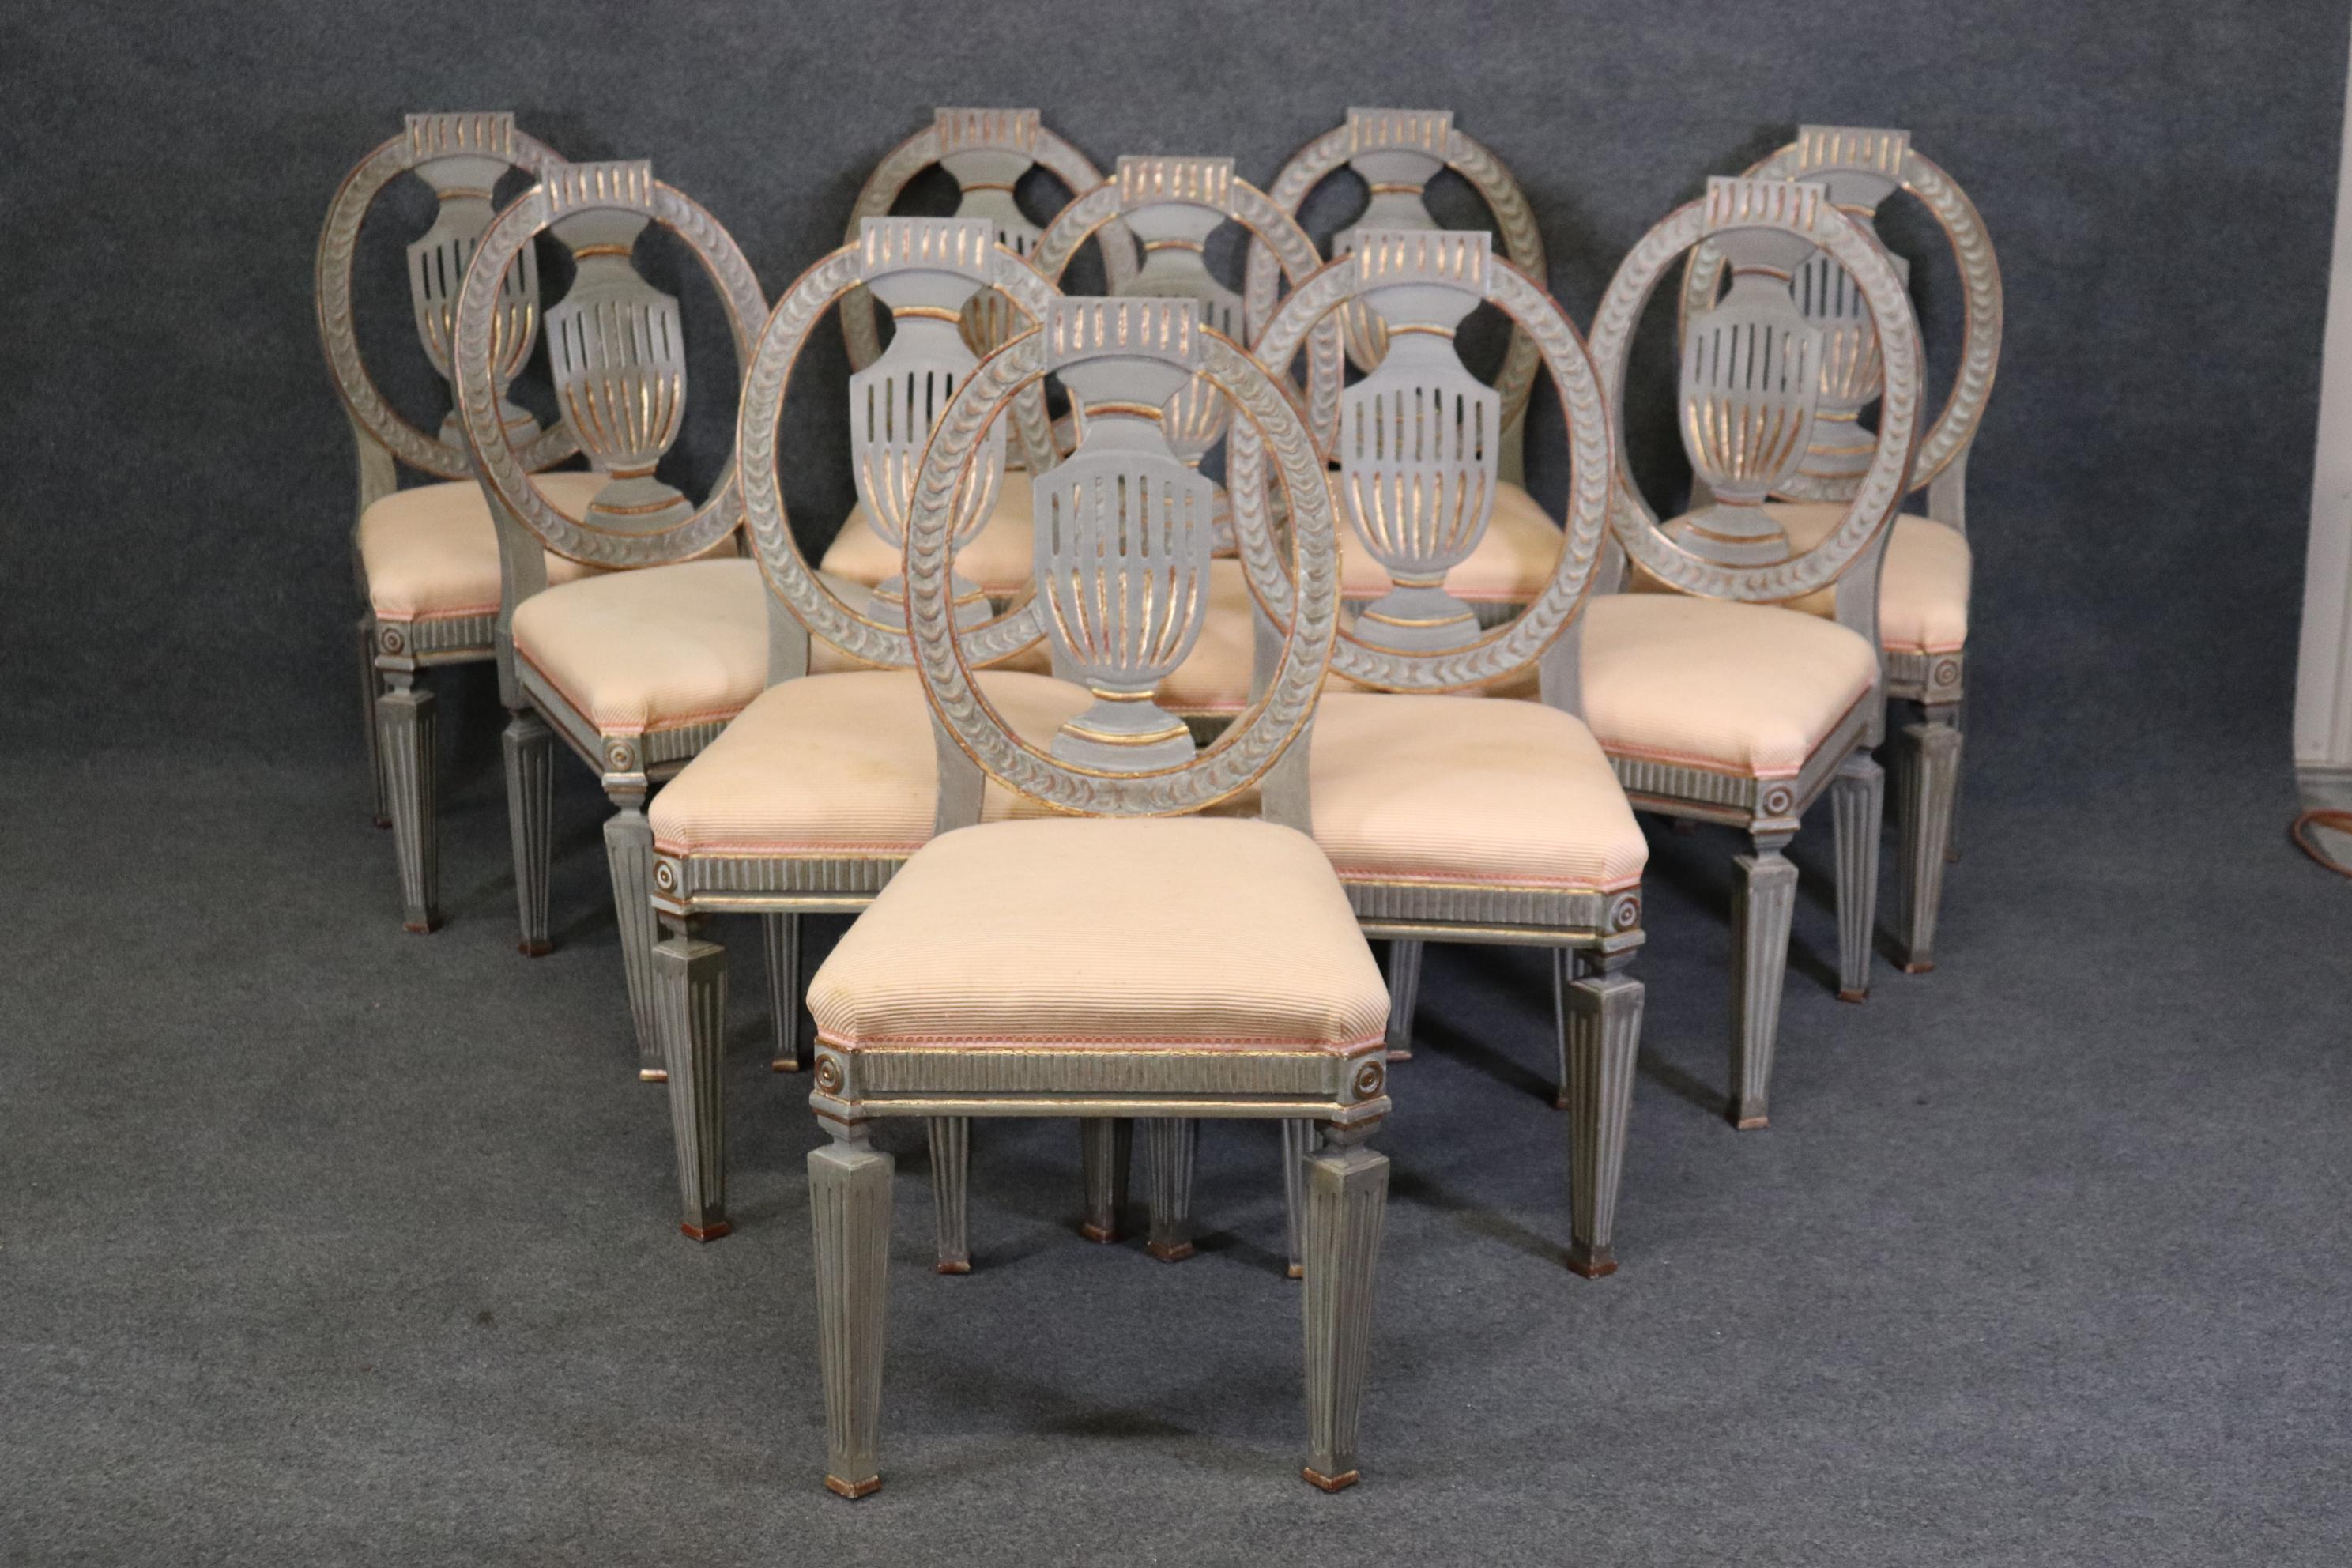 This is a fantastic set of 10 gray paint decorated and gilded Swedish or Gustavian dining chairs. they are authentic Swedish chairs and have gorgeous coloration and fine gilded details and robust design quality. The chairs are in good condition and